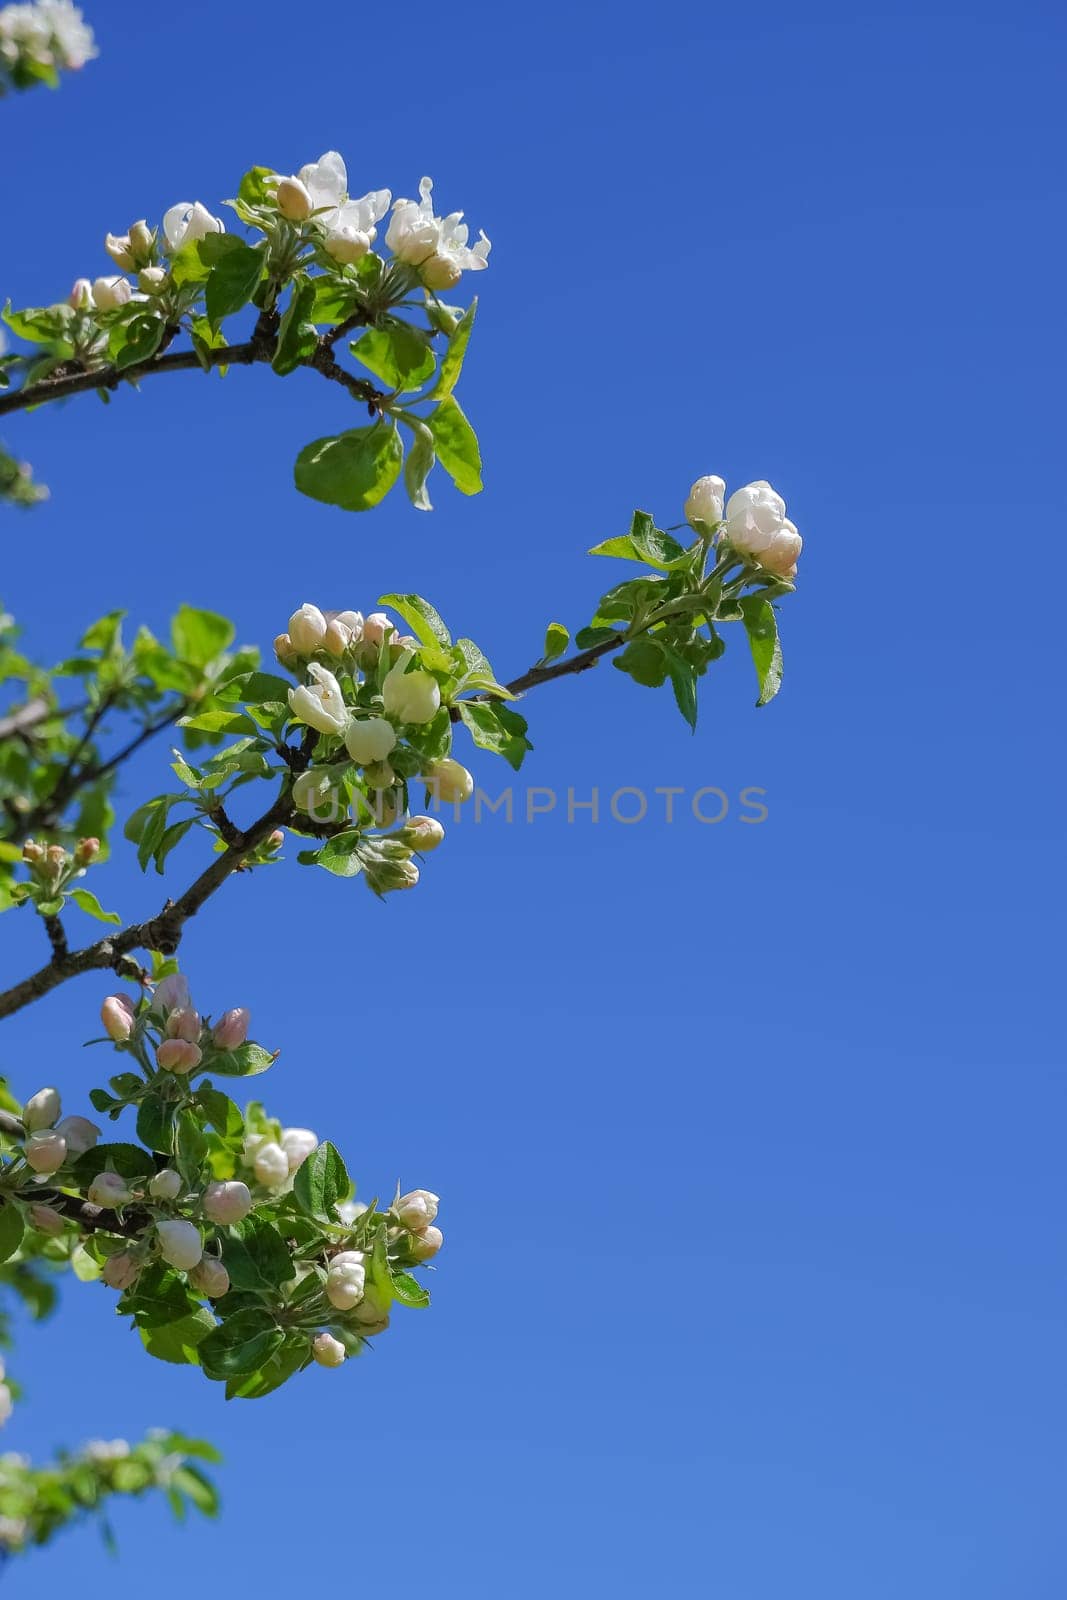 white apple blossoms against a blue sky on a sunny day in spring. shallow depth of field.